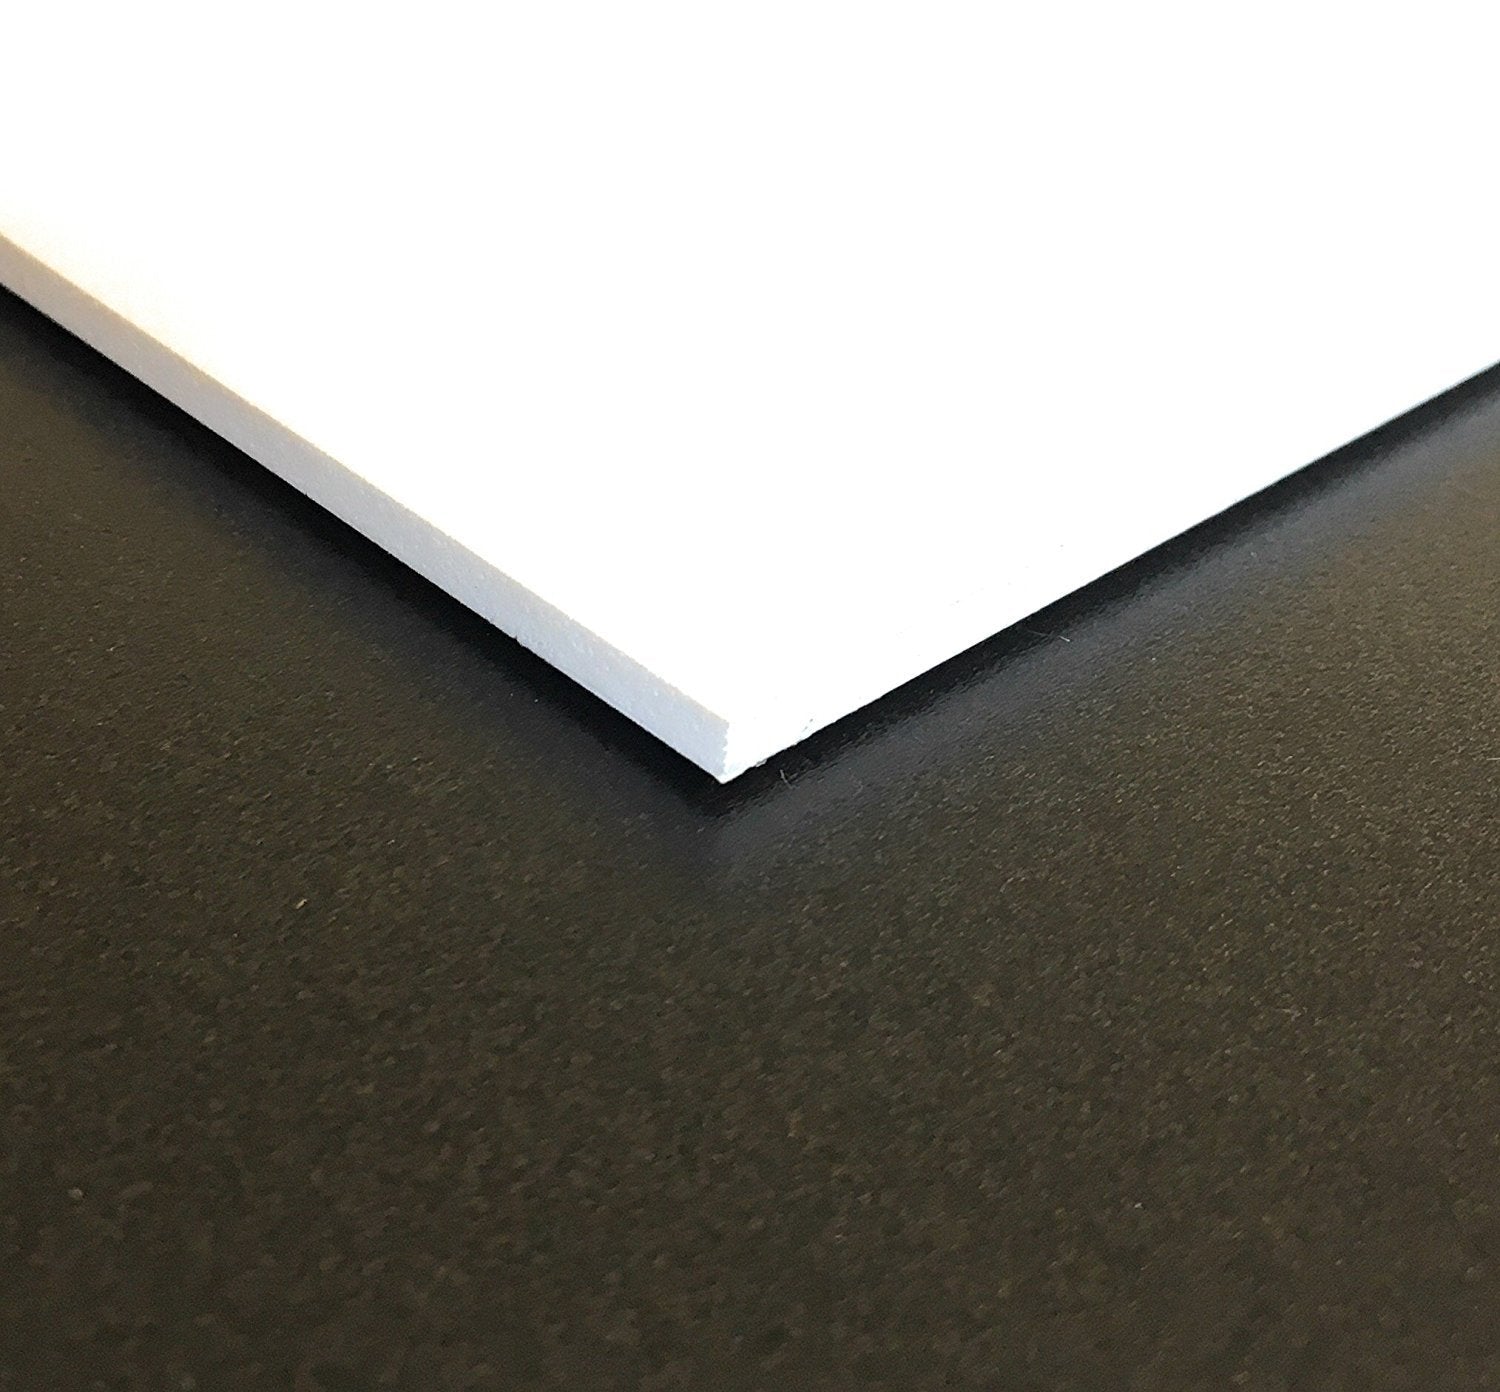 Expanded PVC Sheet – Lightweight Rigid Foam – 3mm (1/8 Inch) – 12 x 12 Inches – White – Ideal for Signage, Displays, and Digital/Screen Printing - RingBinderDepot.com